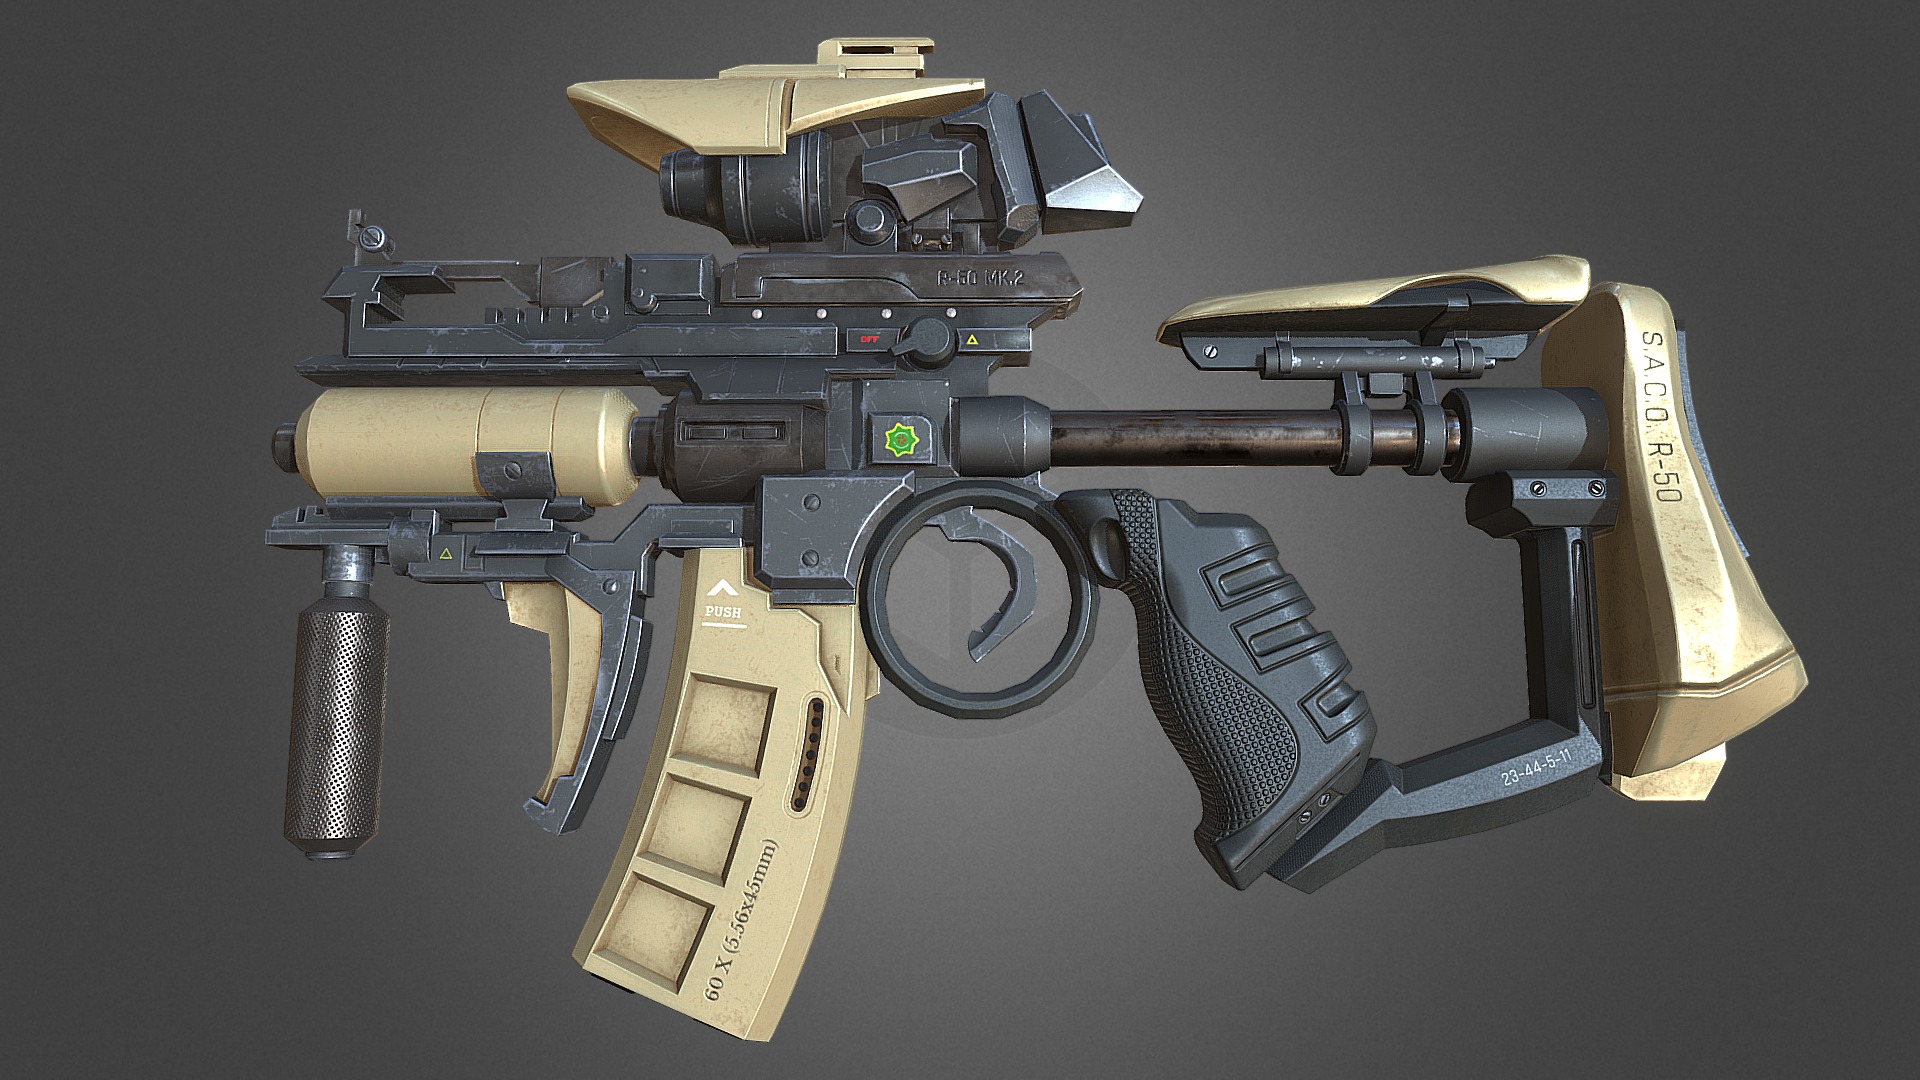 3D model Weapons of the future - This is a 3D model of the Weapons of the future. The 3D model is about a gun with a scope.